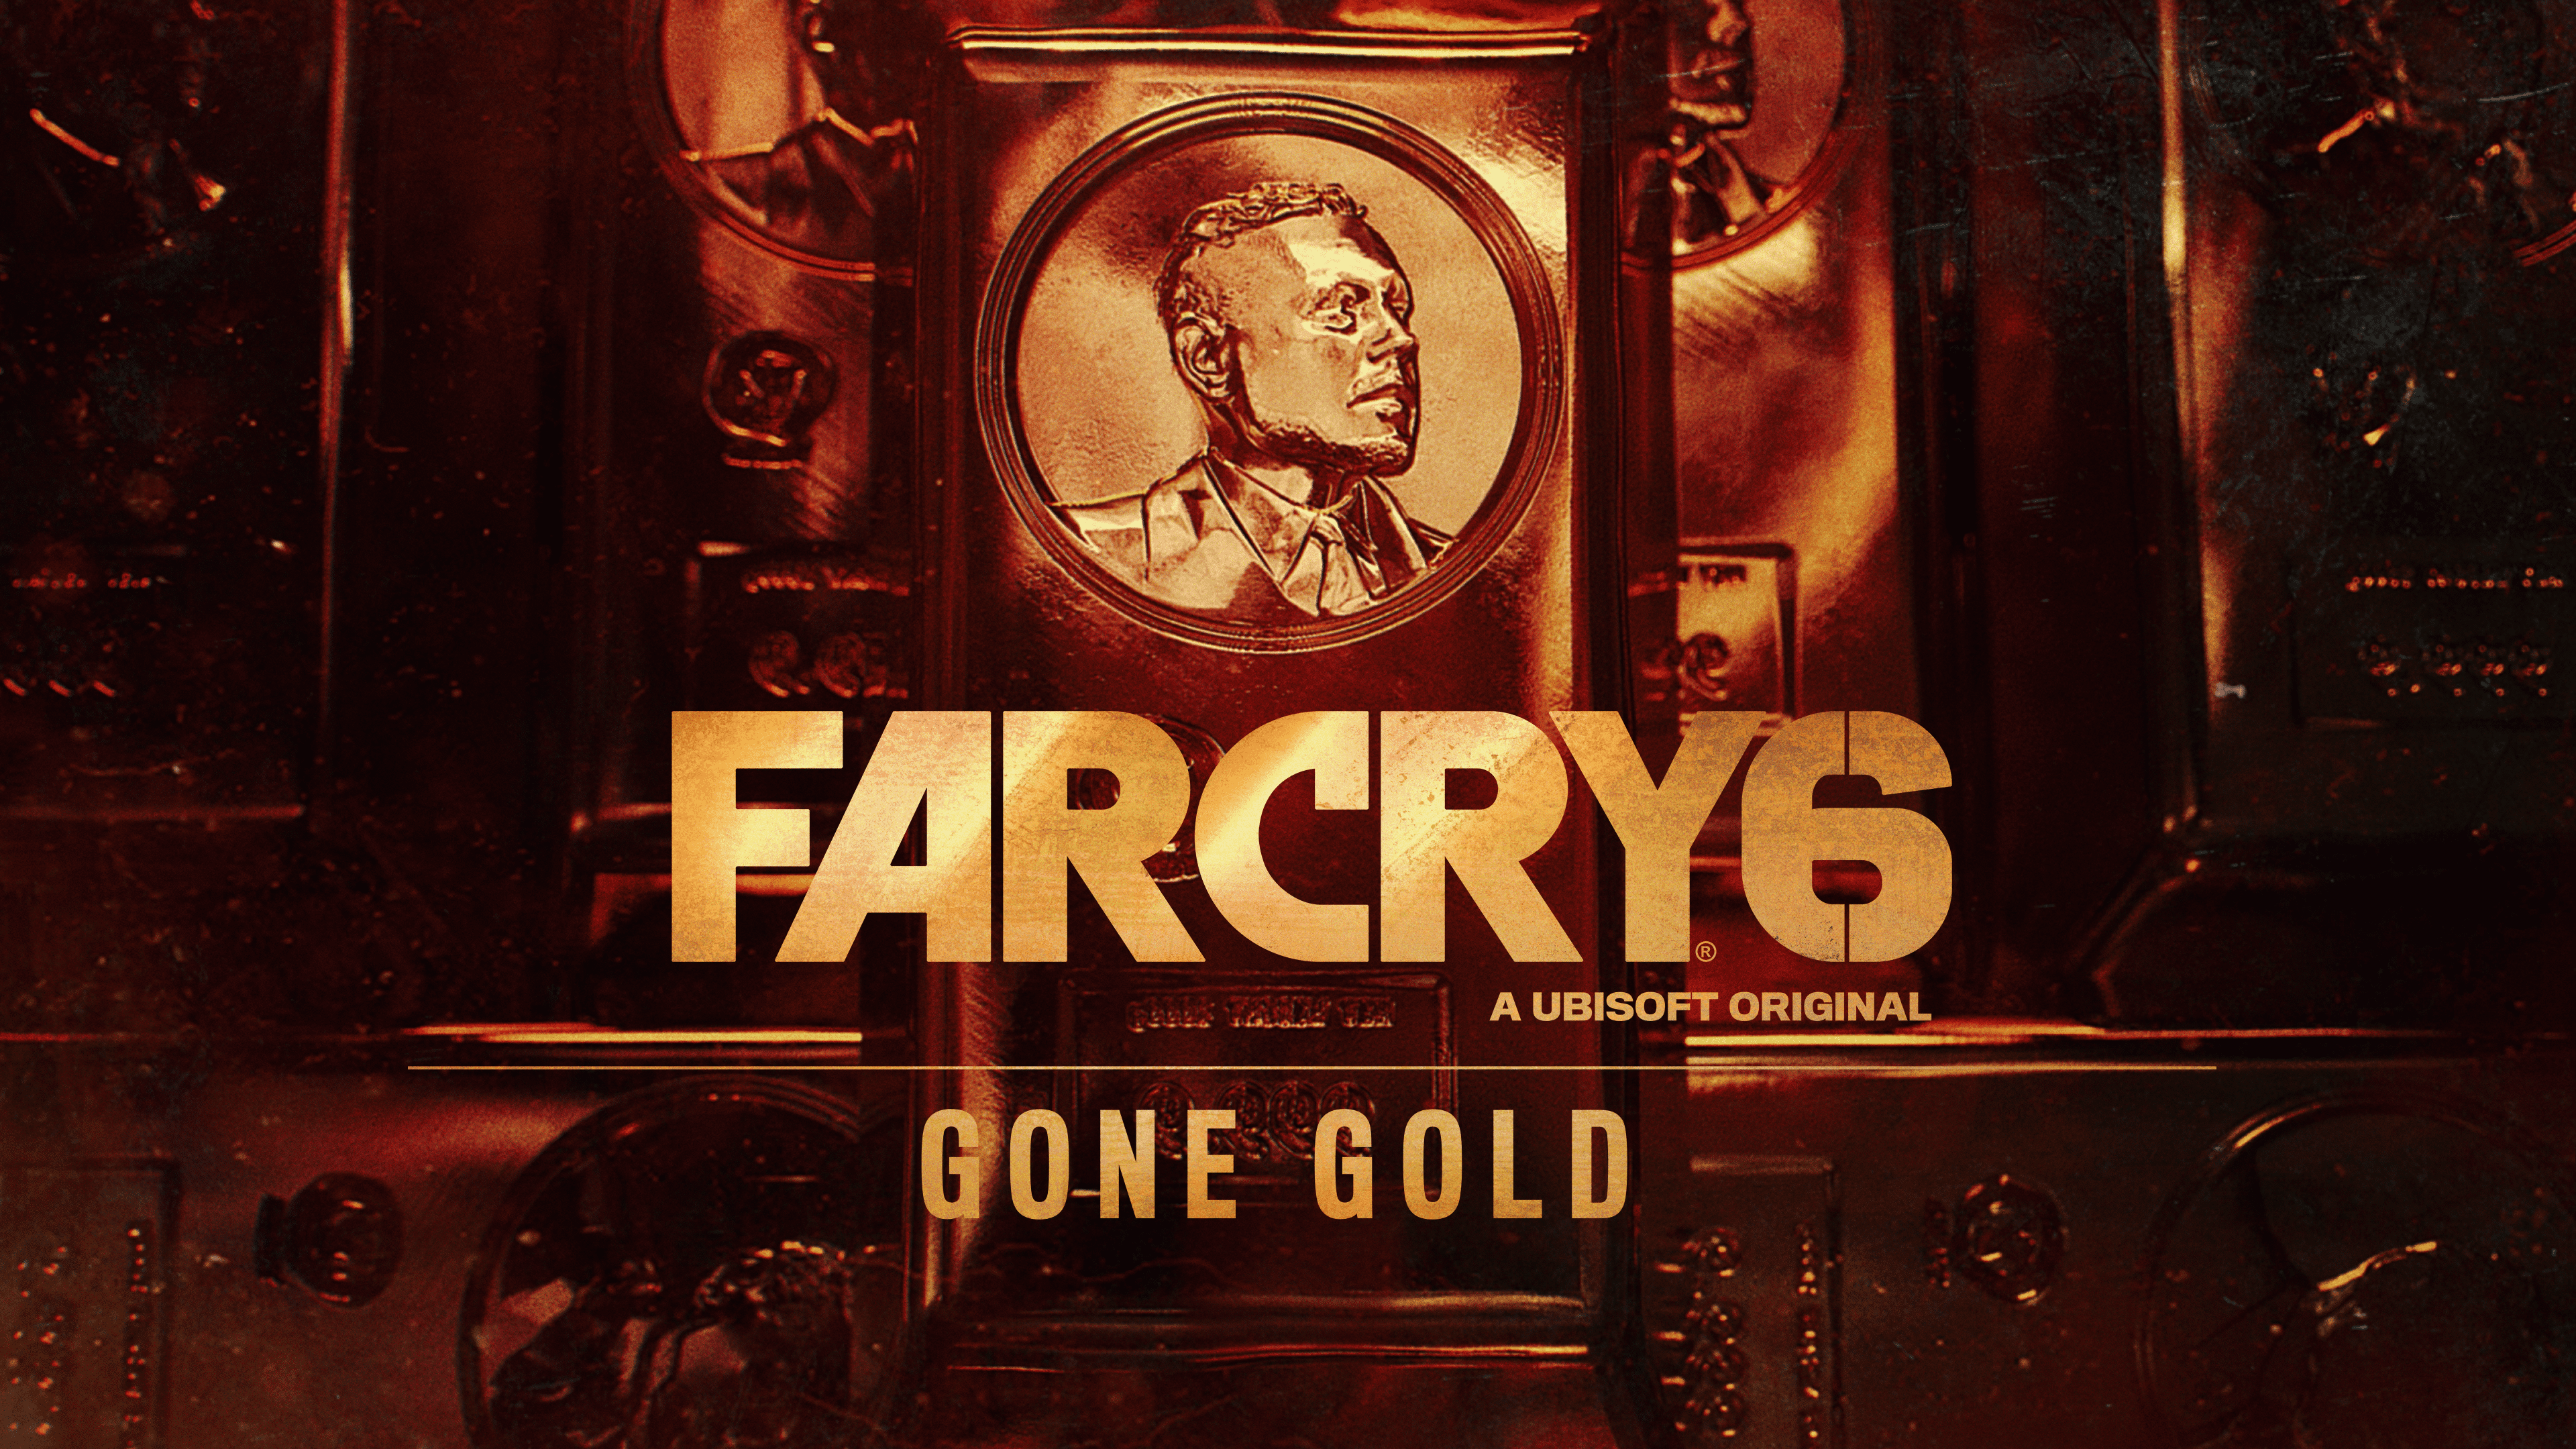 Image of a gold bar with the face of Anton Castillo, the antagonist of Far Cry 6